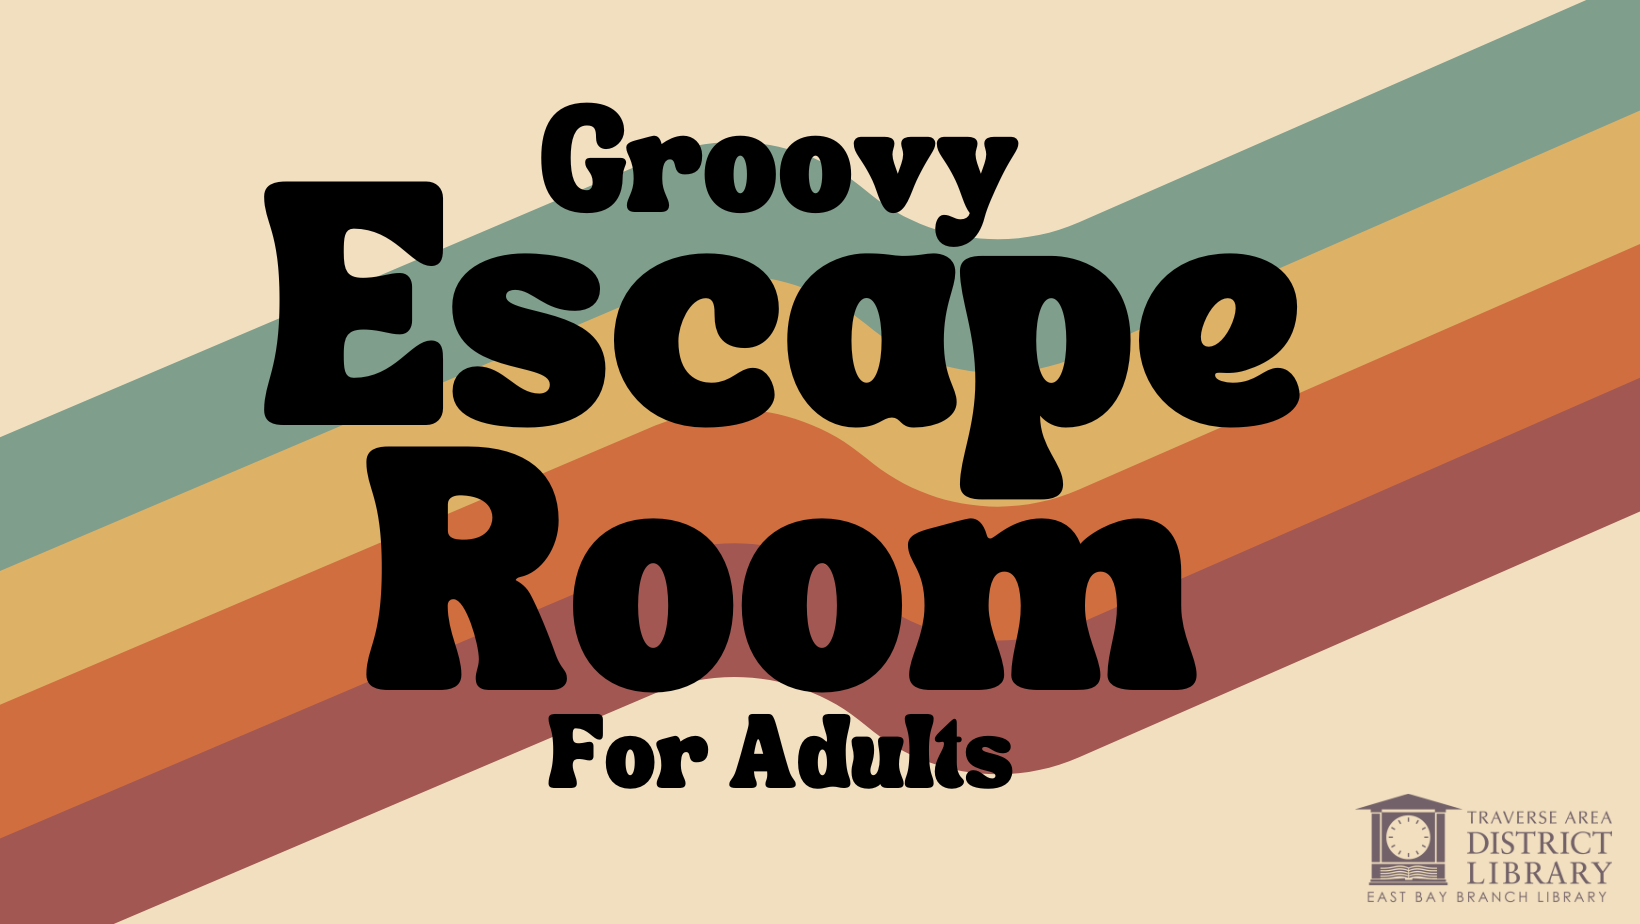 Groovy Escape Room text over colorful wavy lines